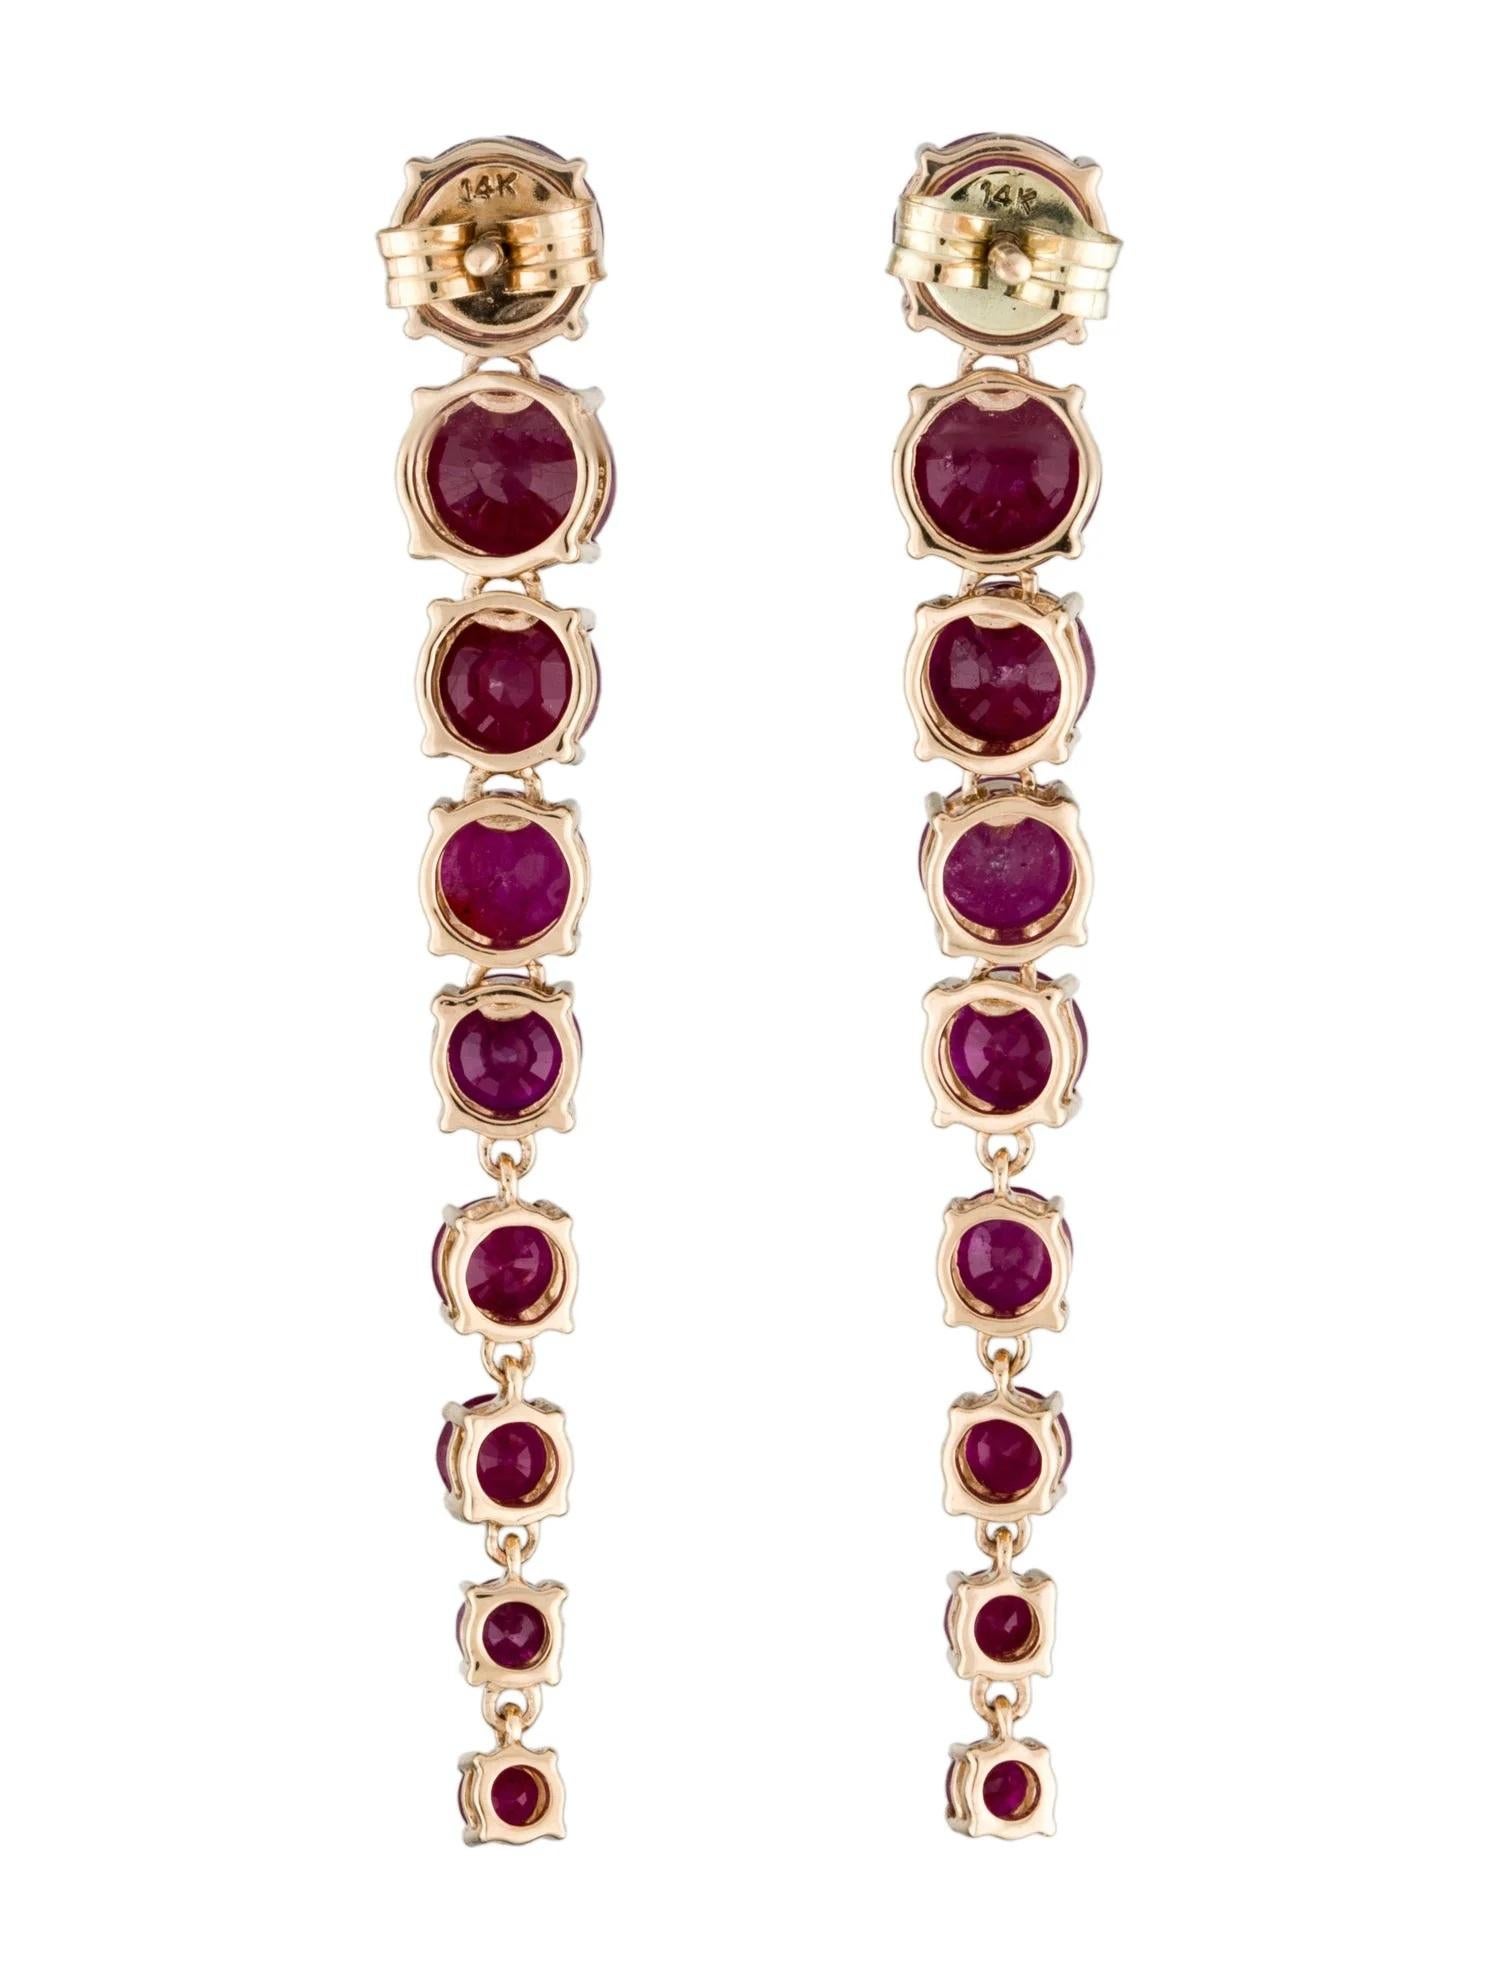 Artist Stylish 14K Yellow Gold Earrings with 6.45 Carat Round Modified Brilliant Ruby For Sale